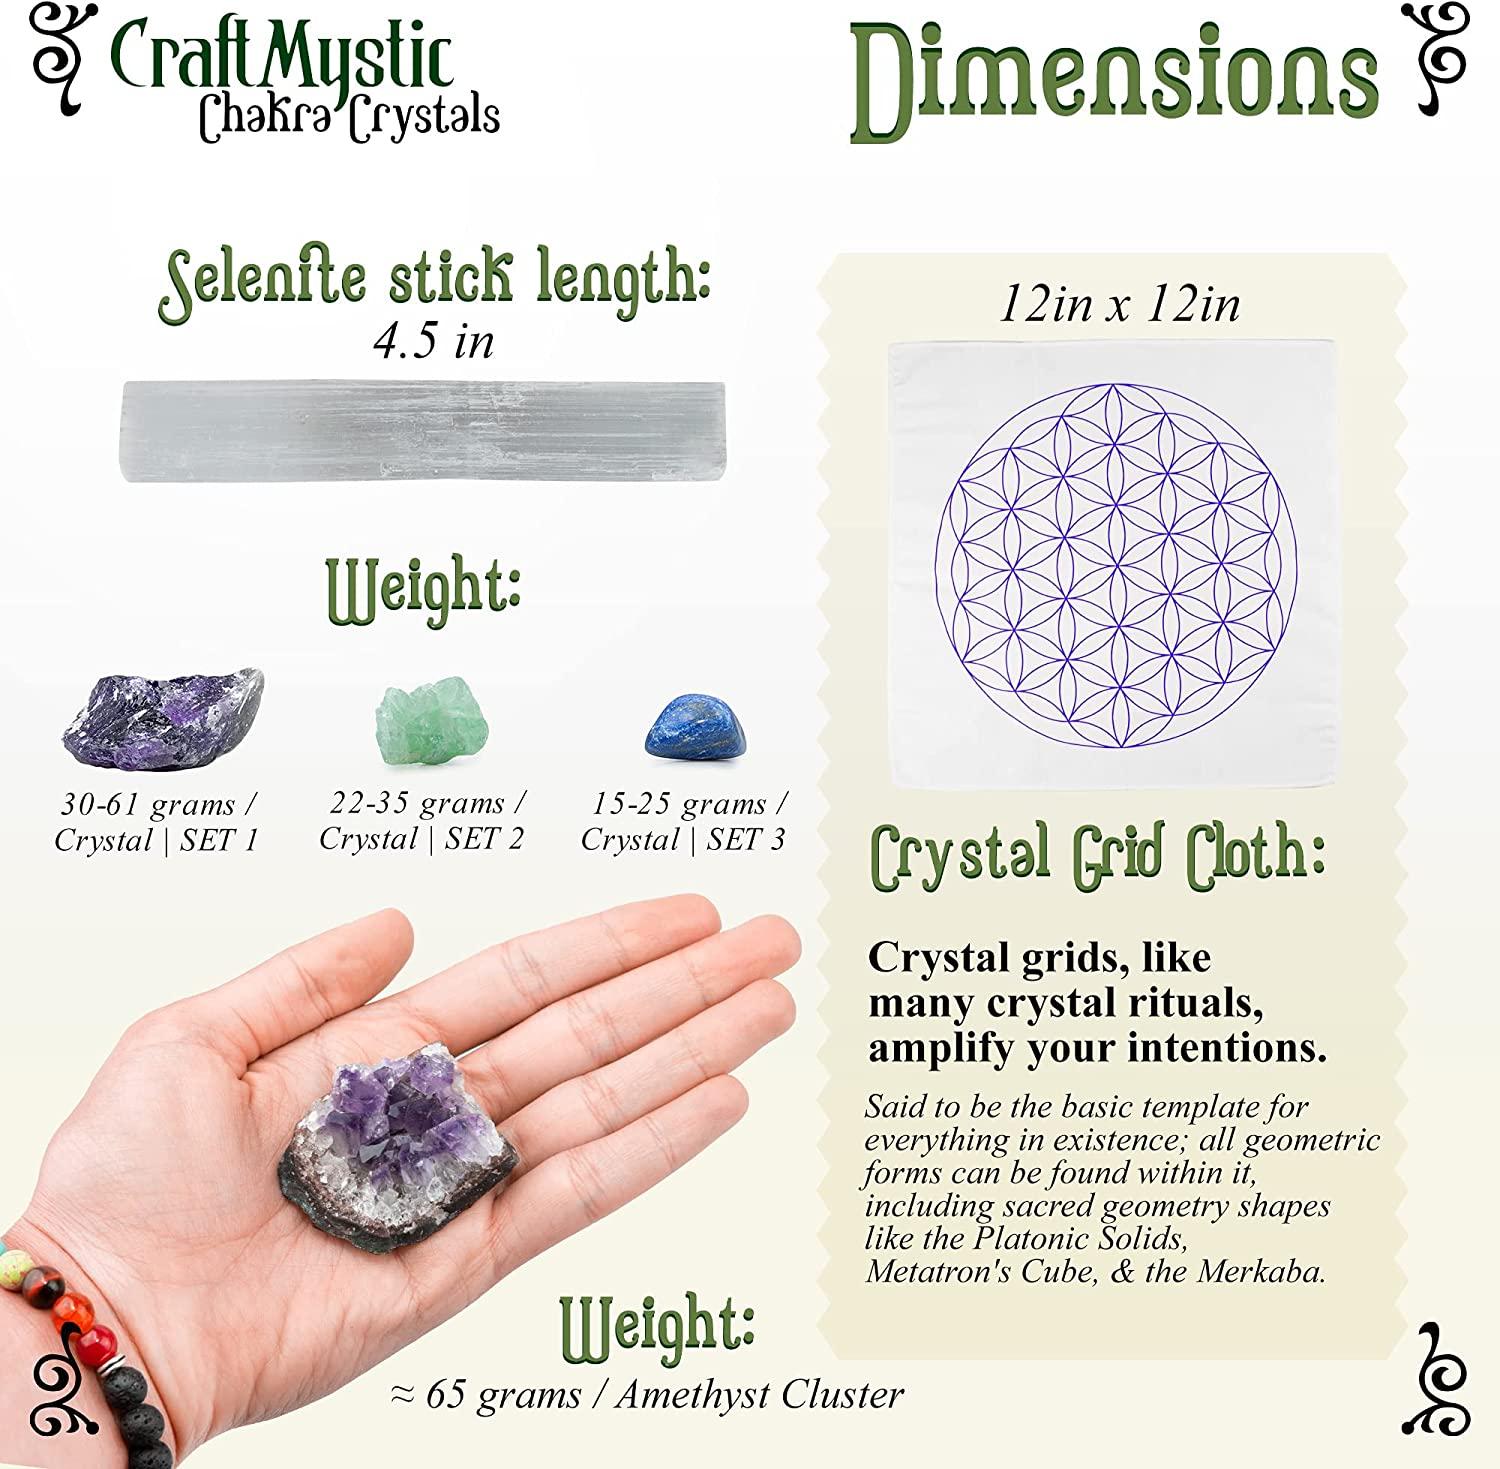 Some ways to spot fake crystals  Crystal healing chart, Crystal healing  stones, Crystals and gemstones